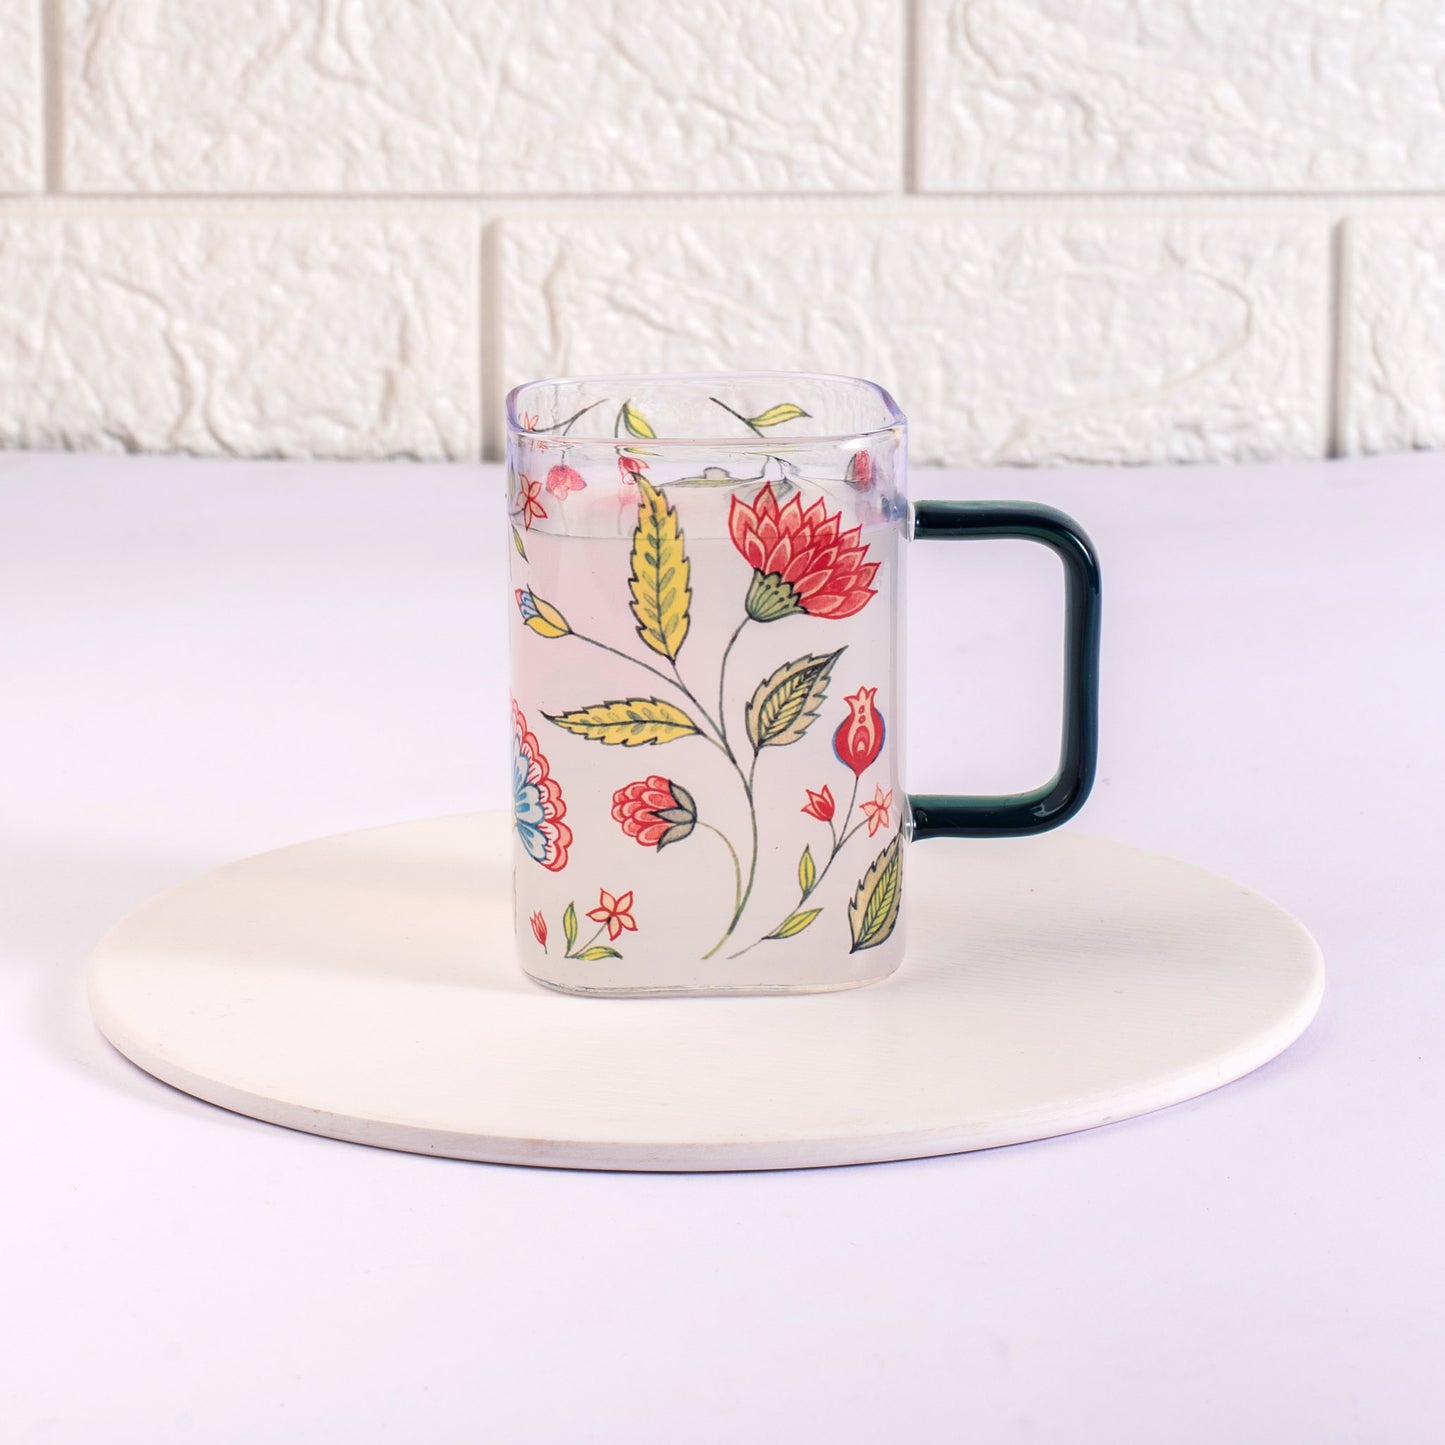 Enchanted Garden Square Coffee/Tea mugs - Set of 2 and 4